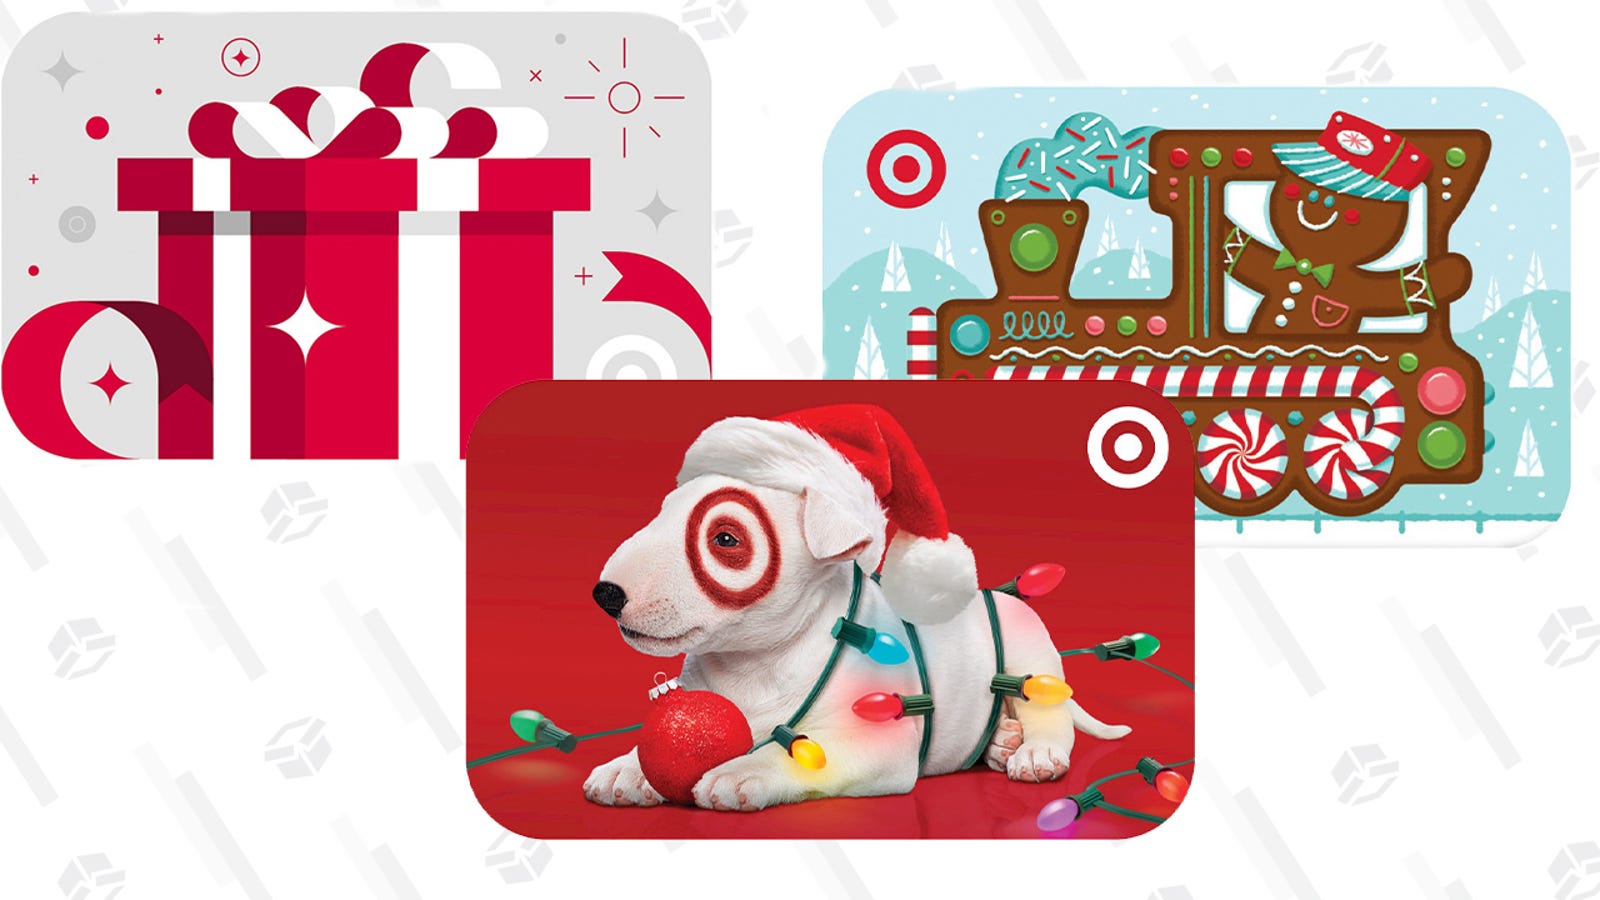 Does Target Have Gift Cards